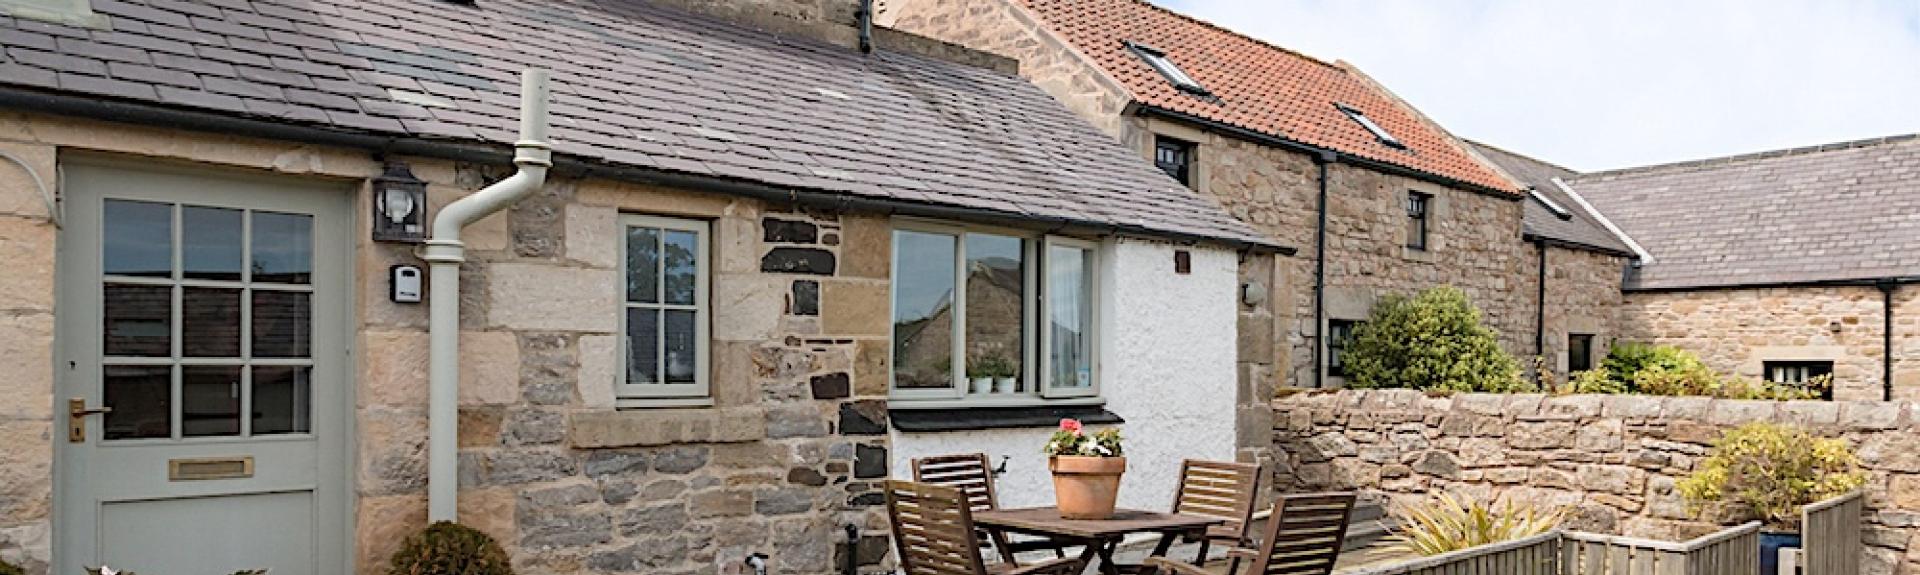 Exterior of a stone-built holiday cottage with ground fllor extension behind a paveed  garden with dining table and chairs.